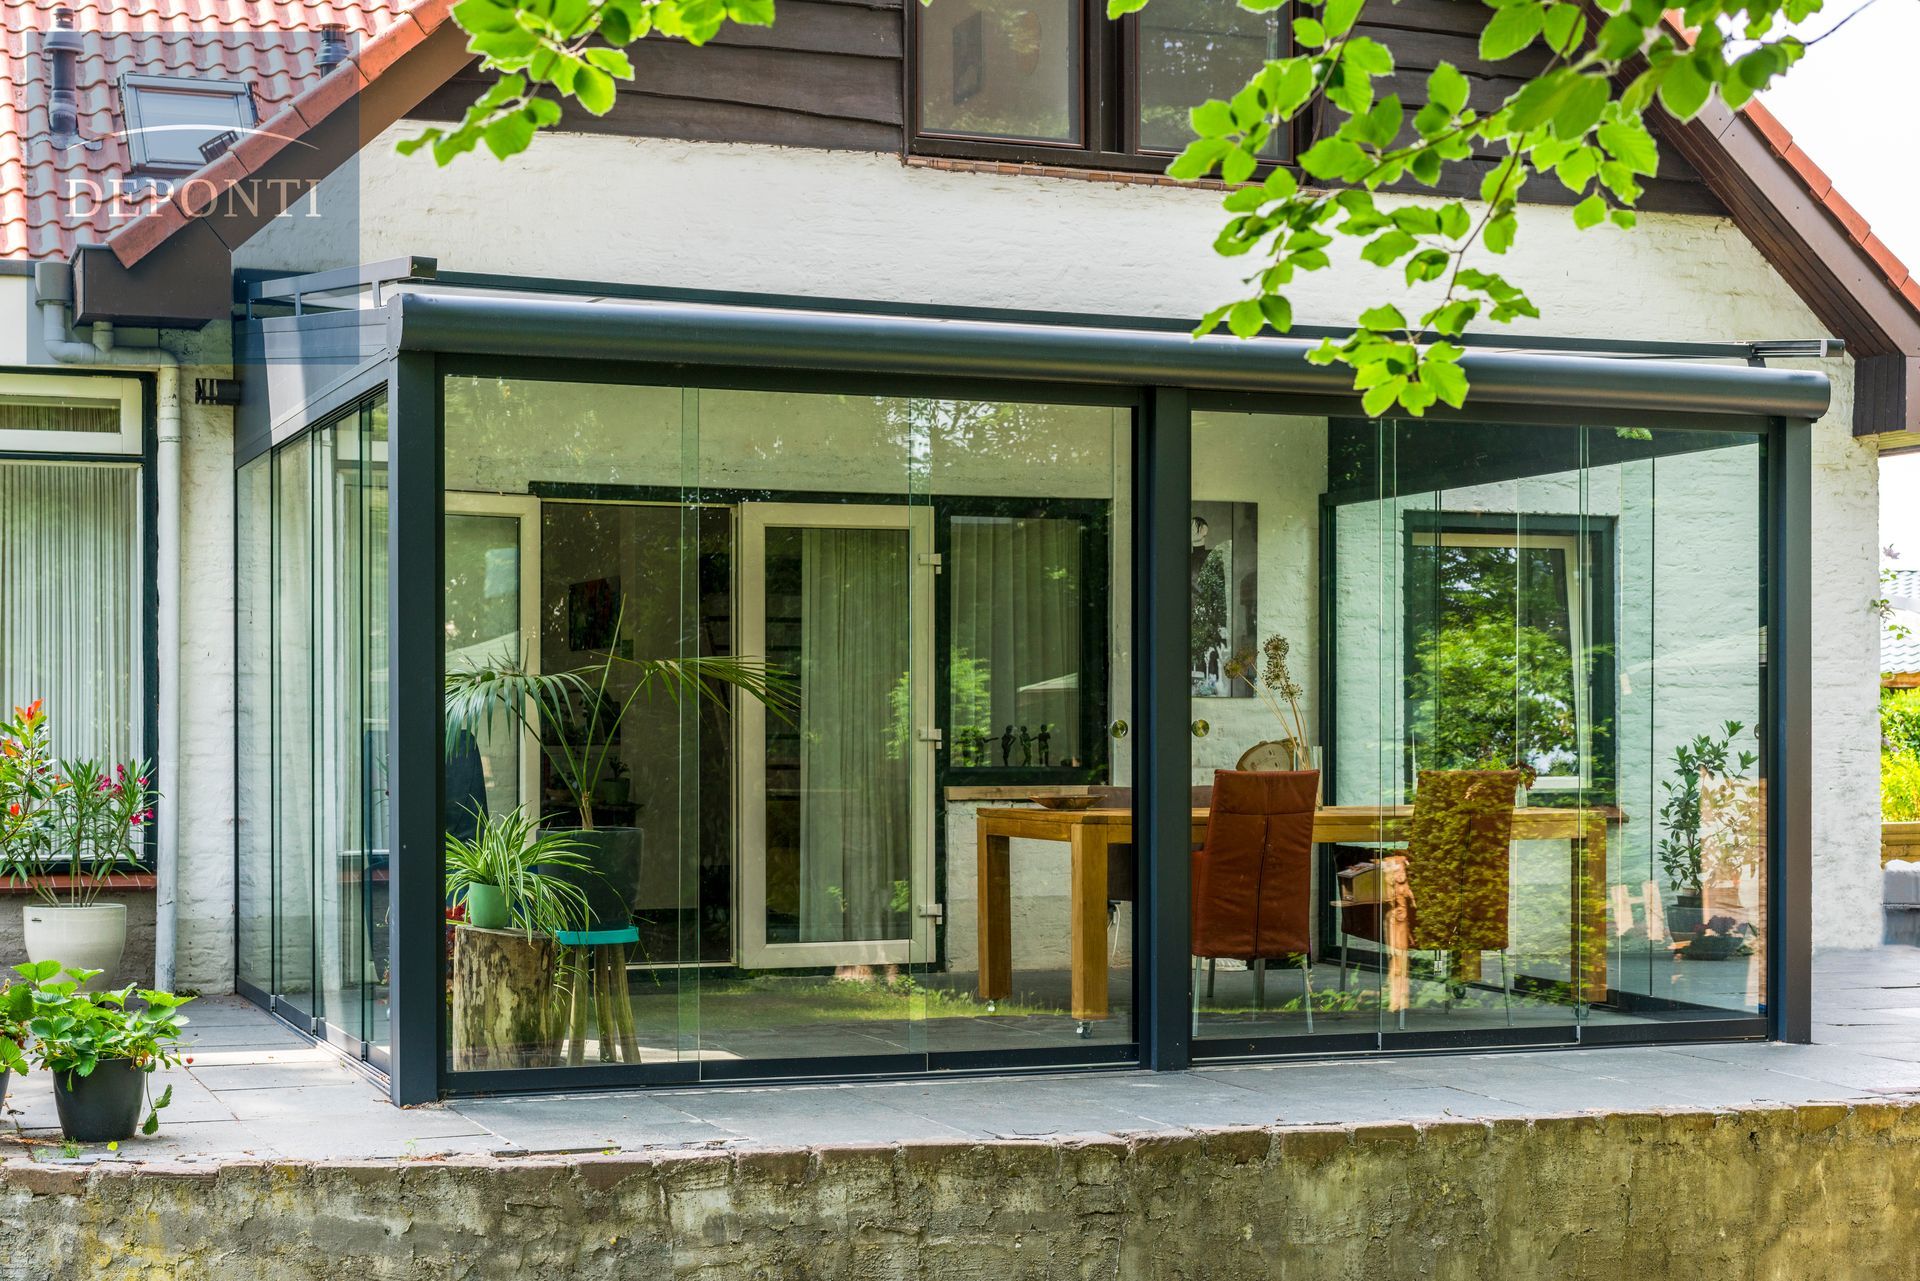 Deponti aluminium veranda with glass sliding panels to the side and front and a table and chairs under the canopy